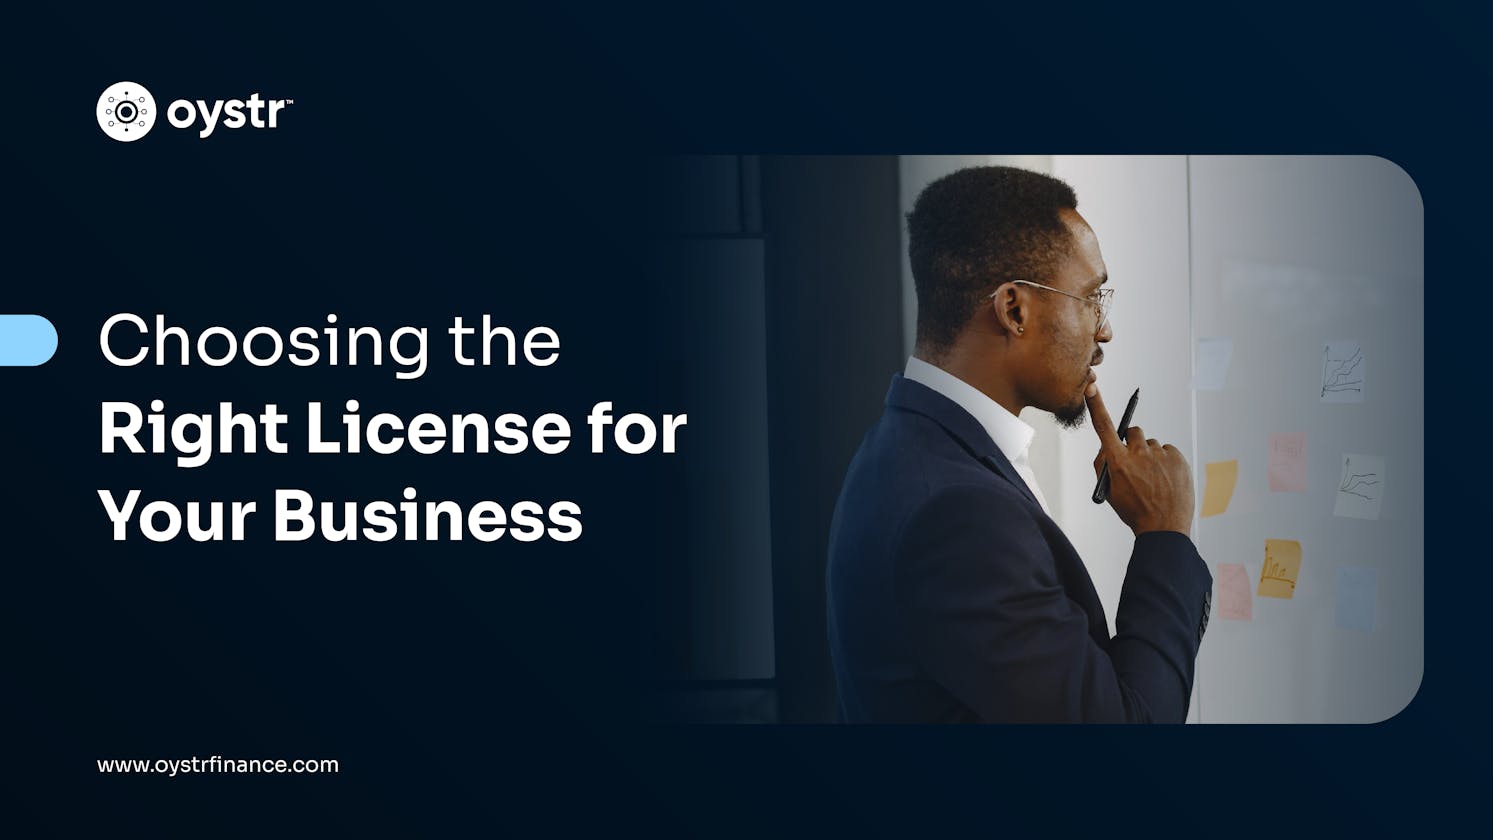 Choosing the Right License for Your Business